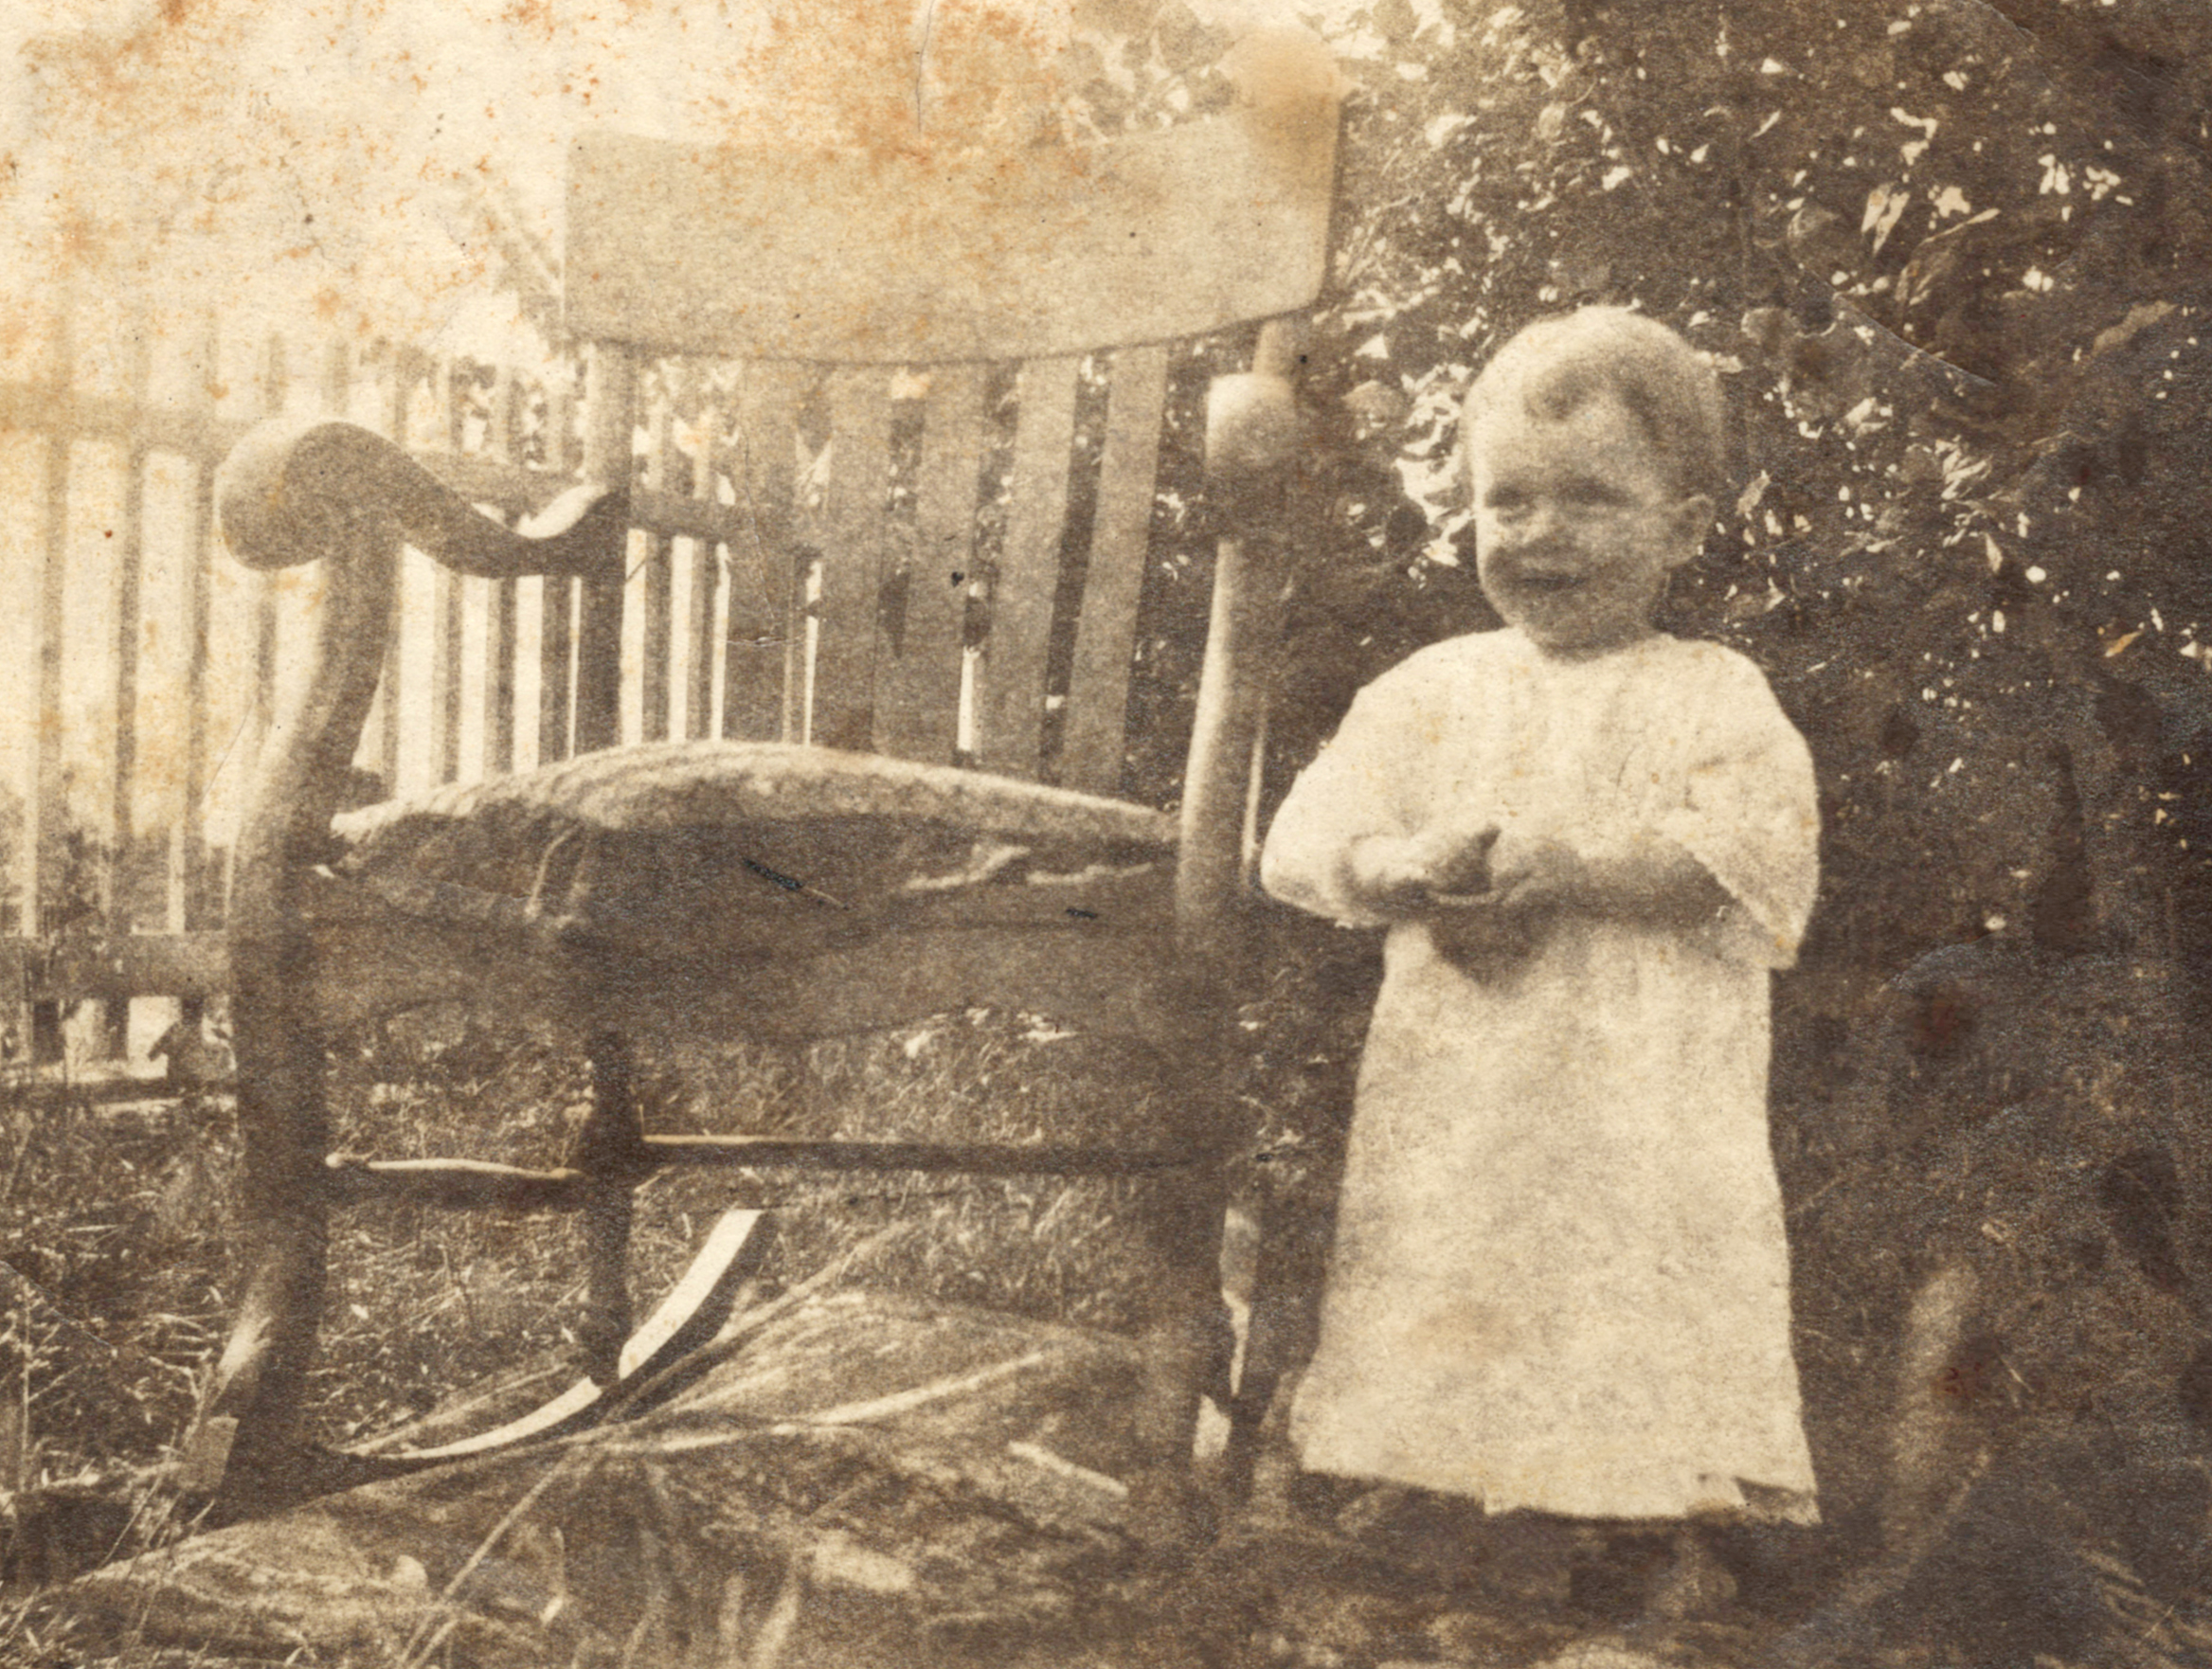 Marjorie with a family rocking chair